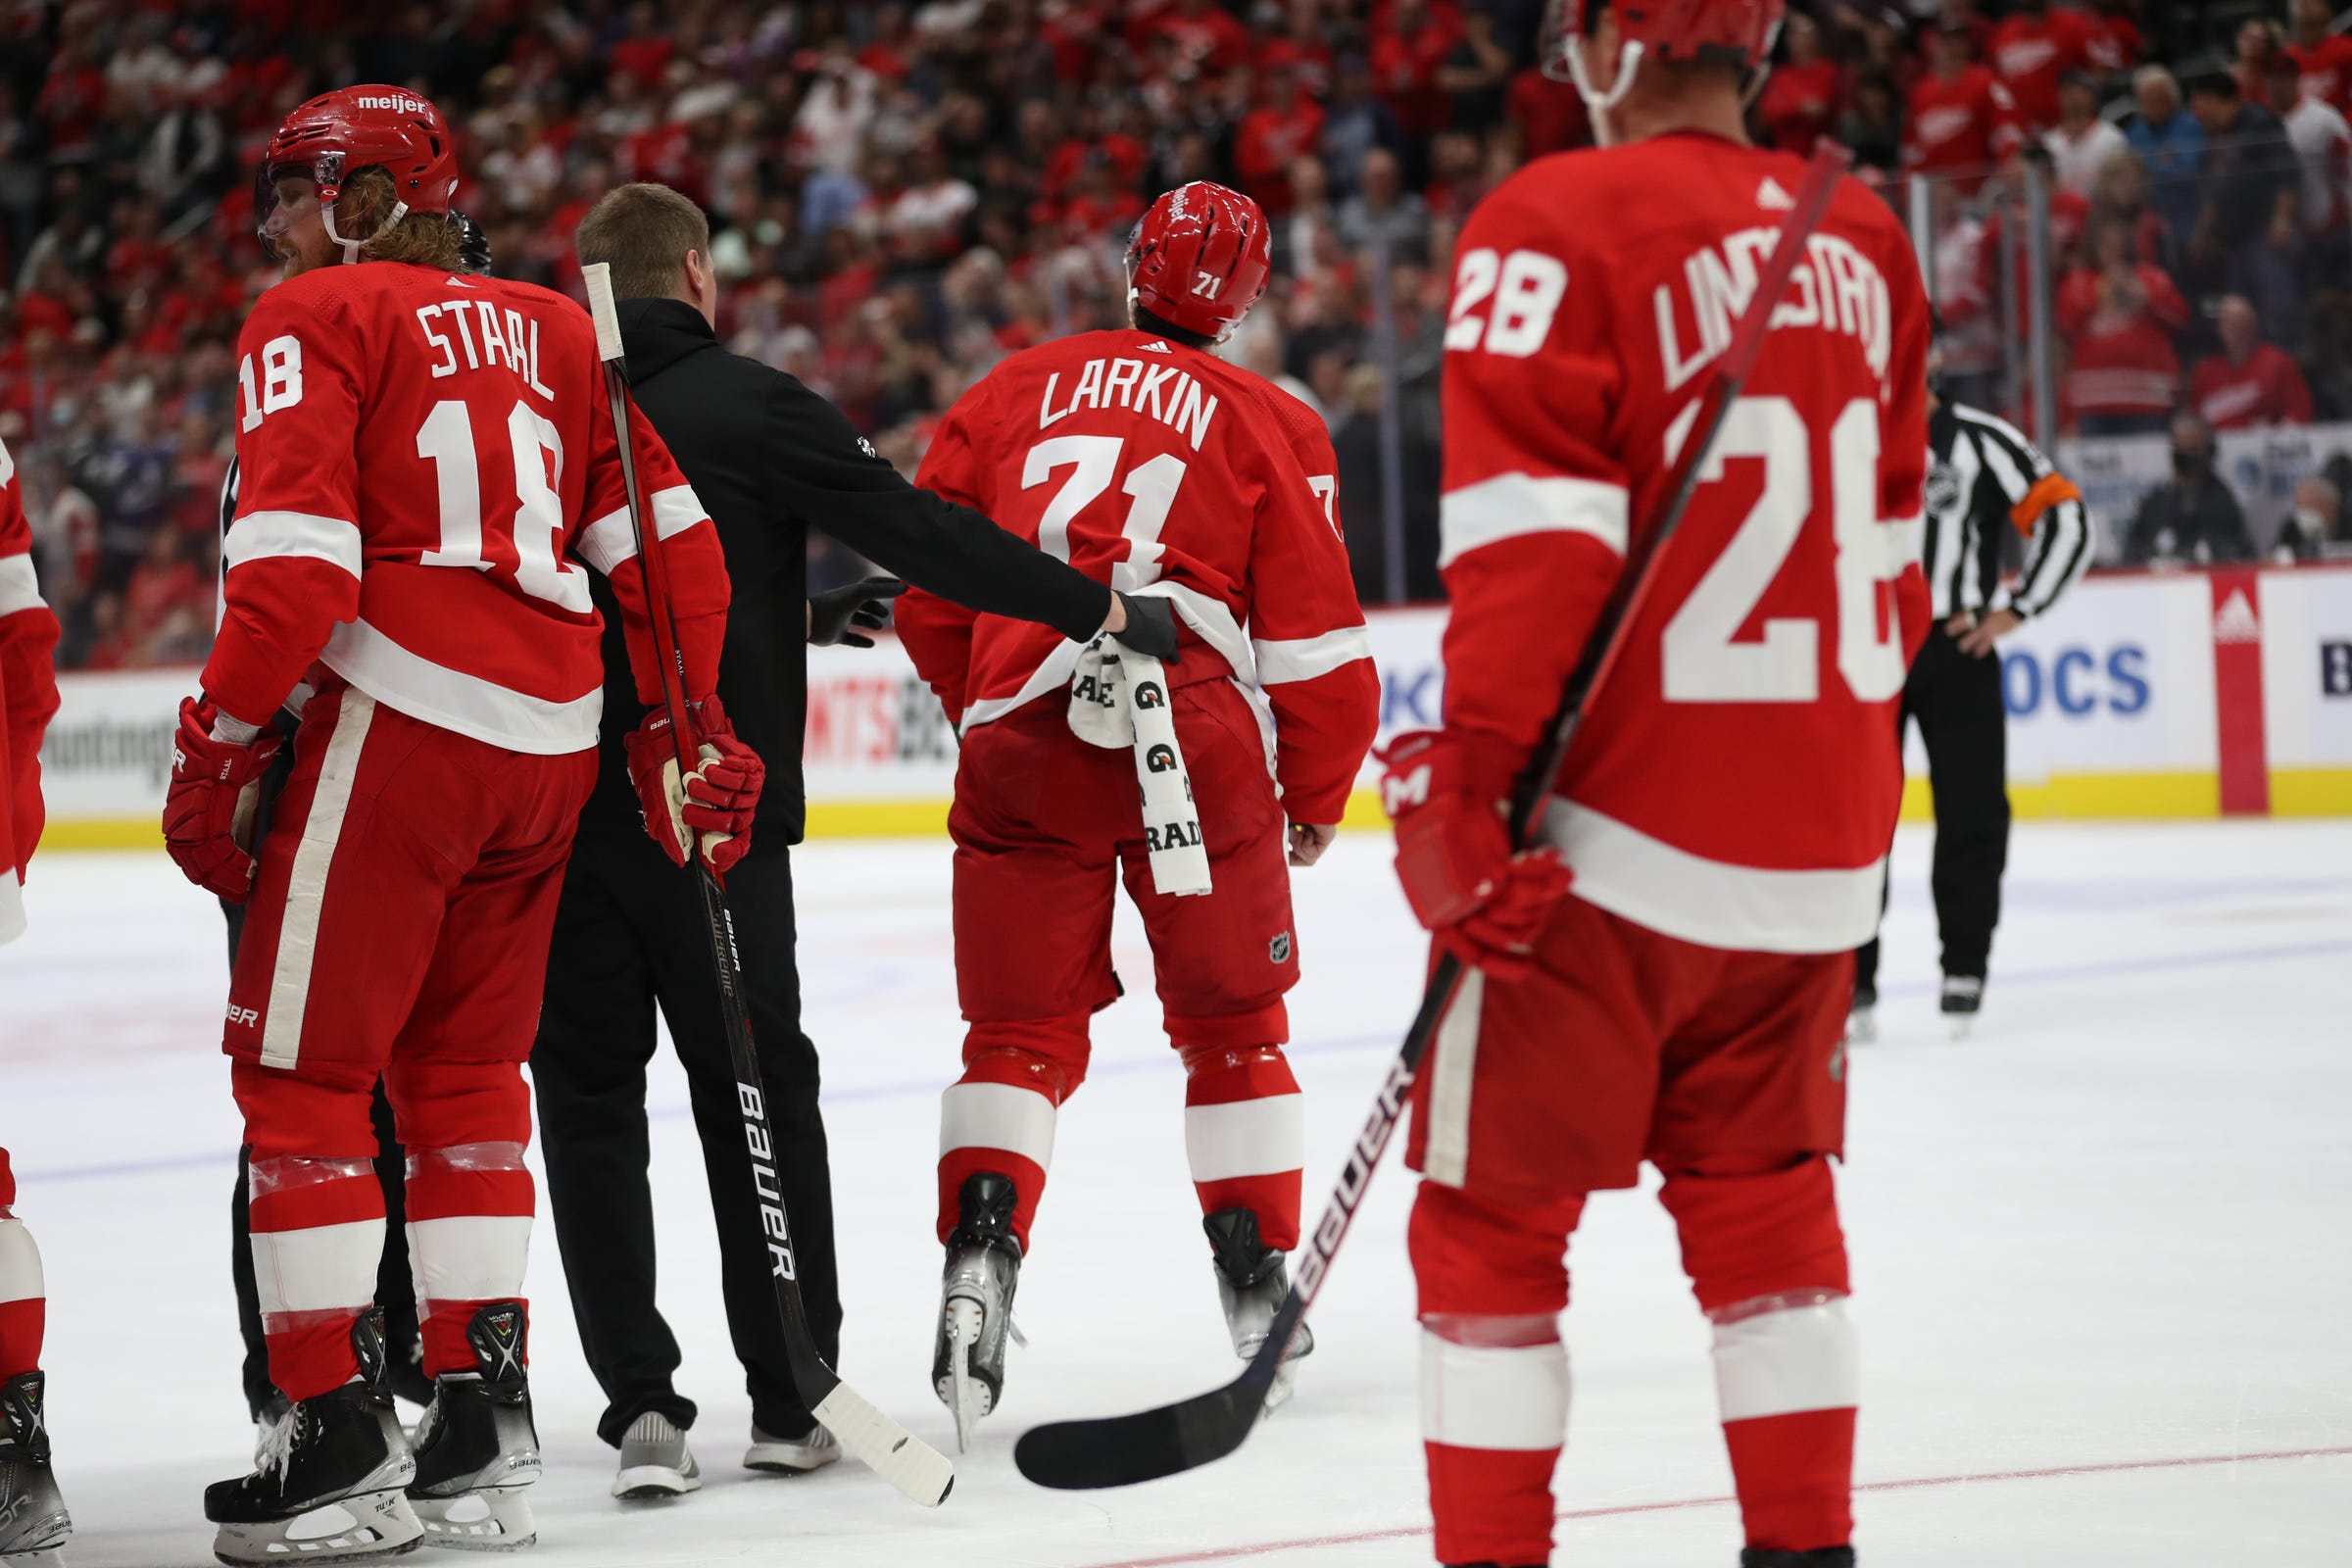 NHL suspends Detroit Red Wings' Dylan Larkin for throwing punch in retaliation